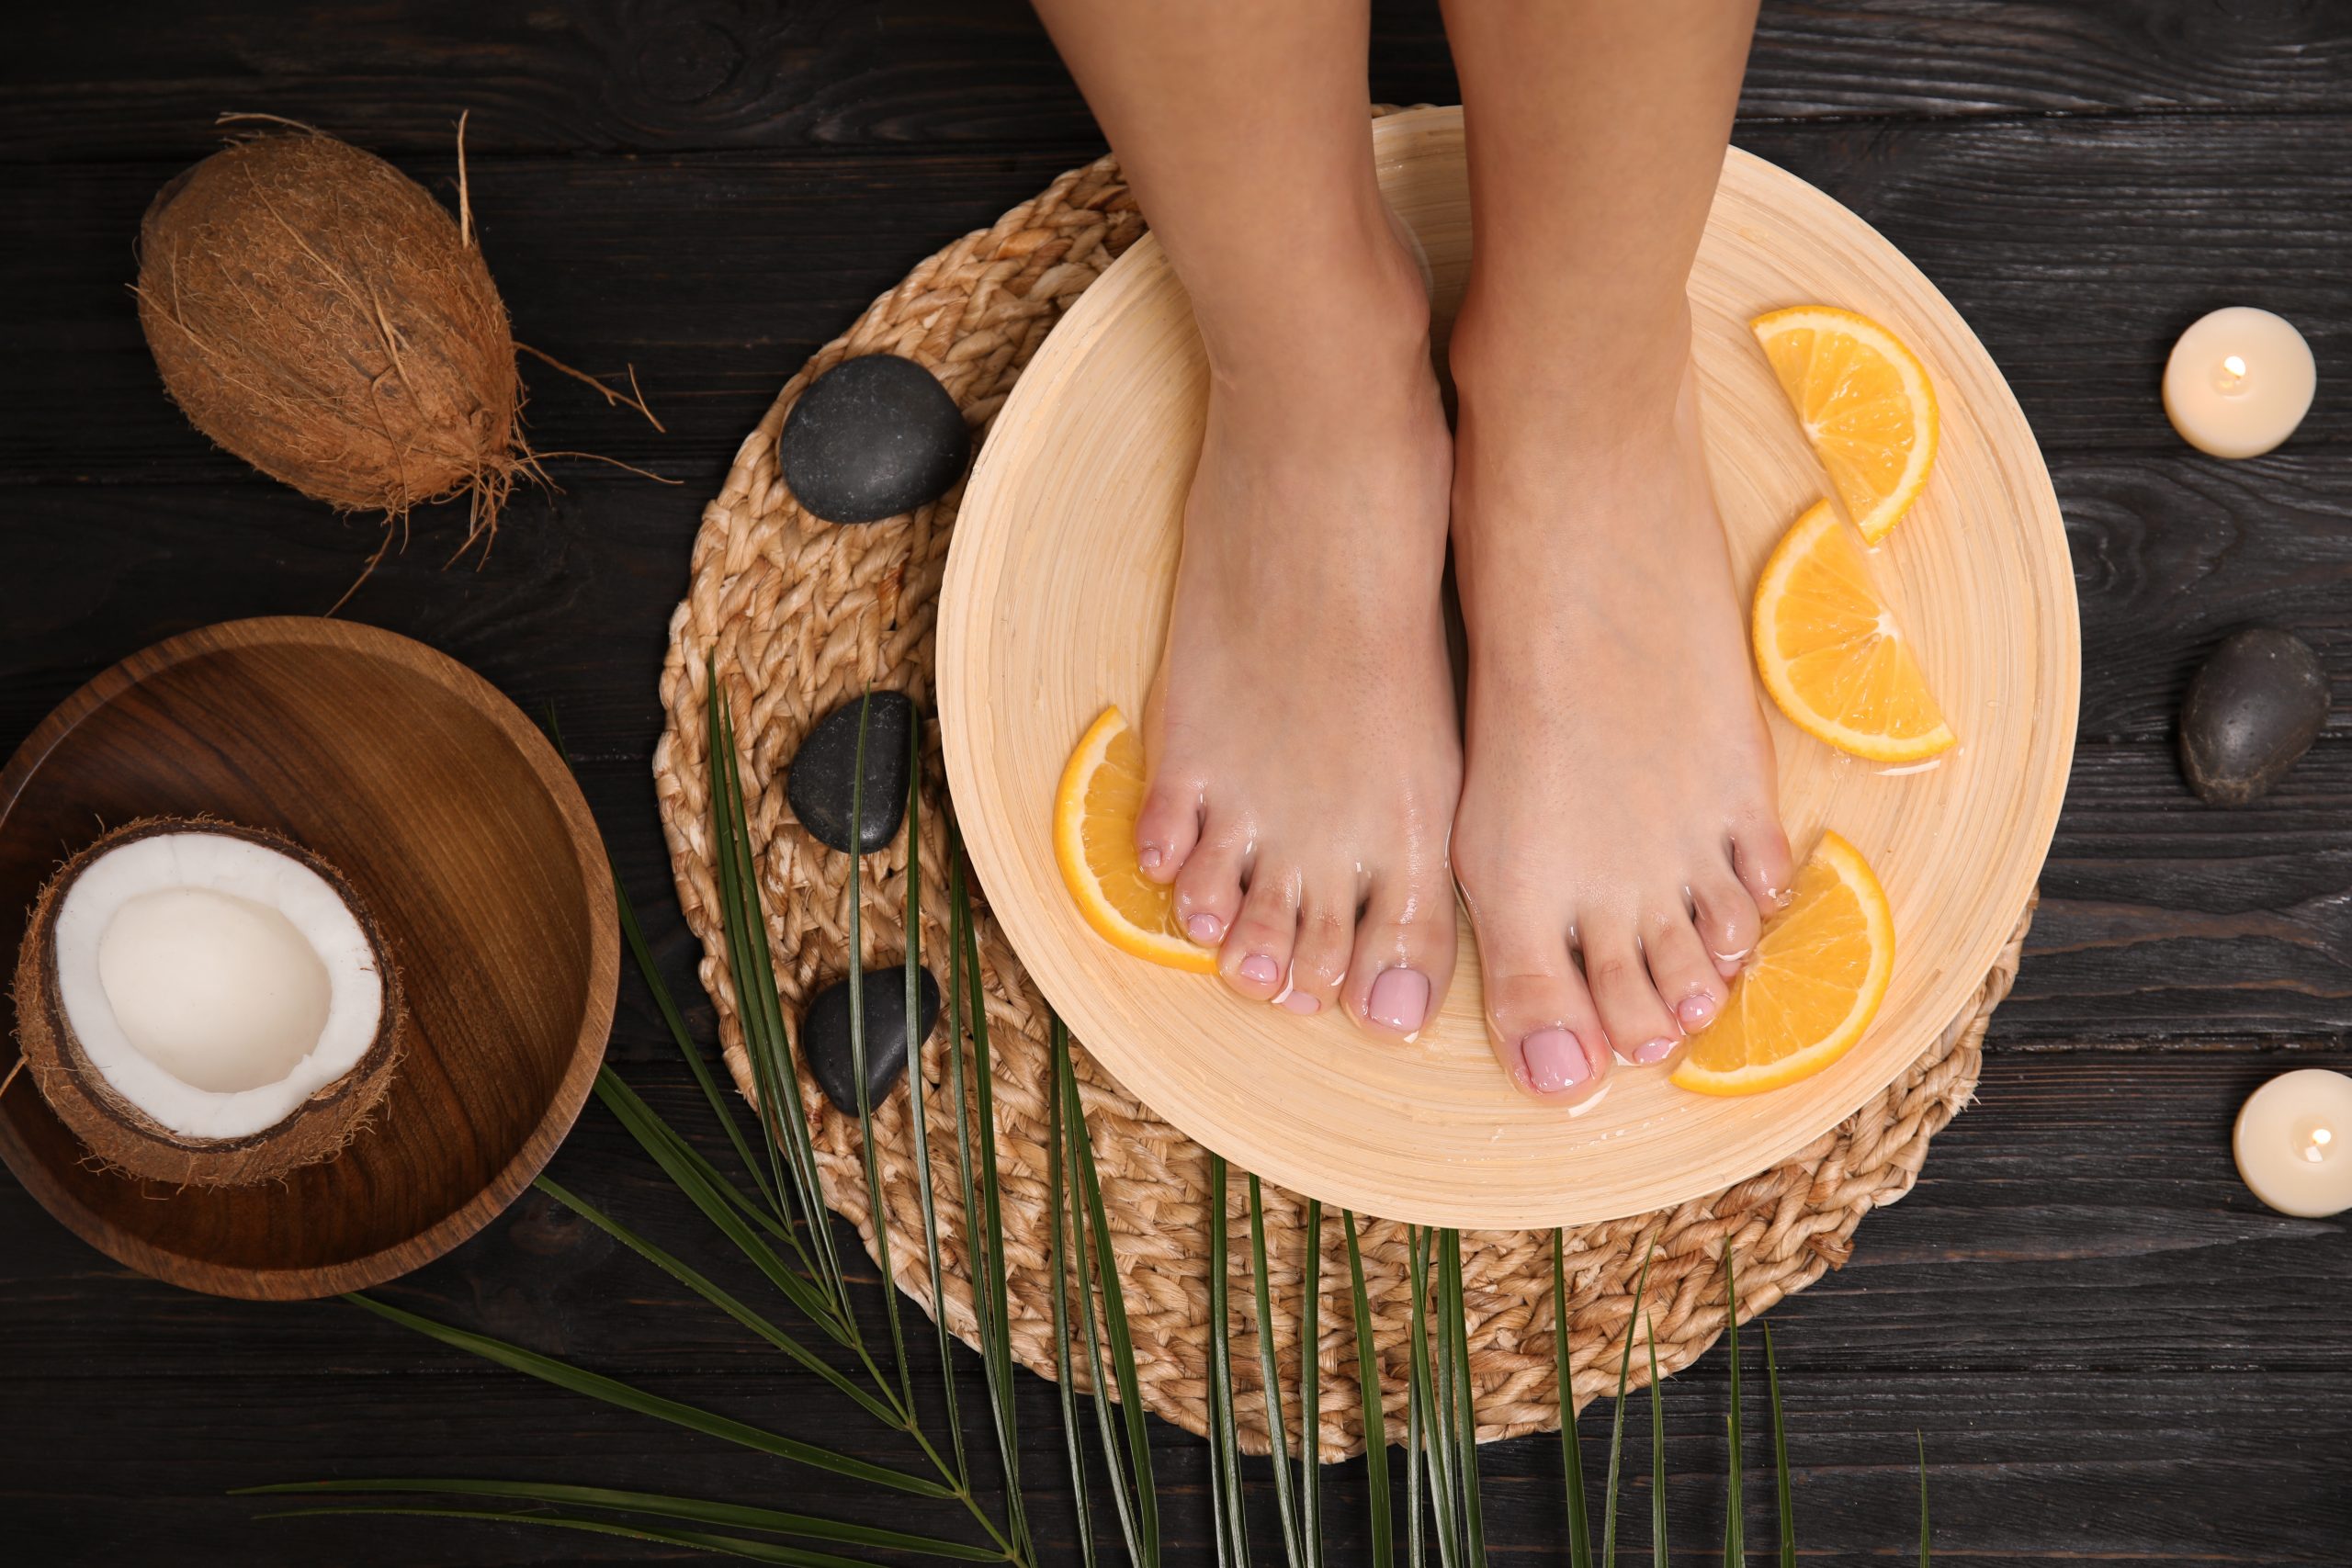 Woman soaking her feet in plate with water and orange slices on wooden floor, top view. Spa treatment